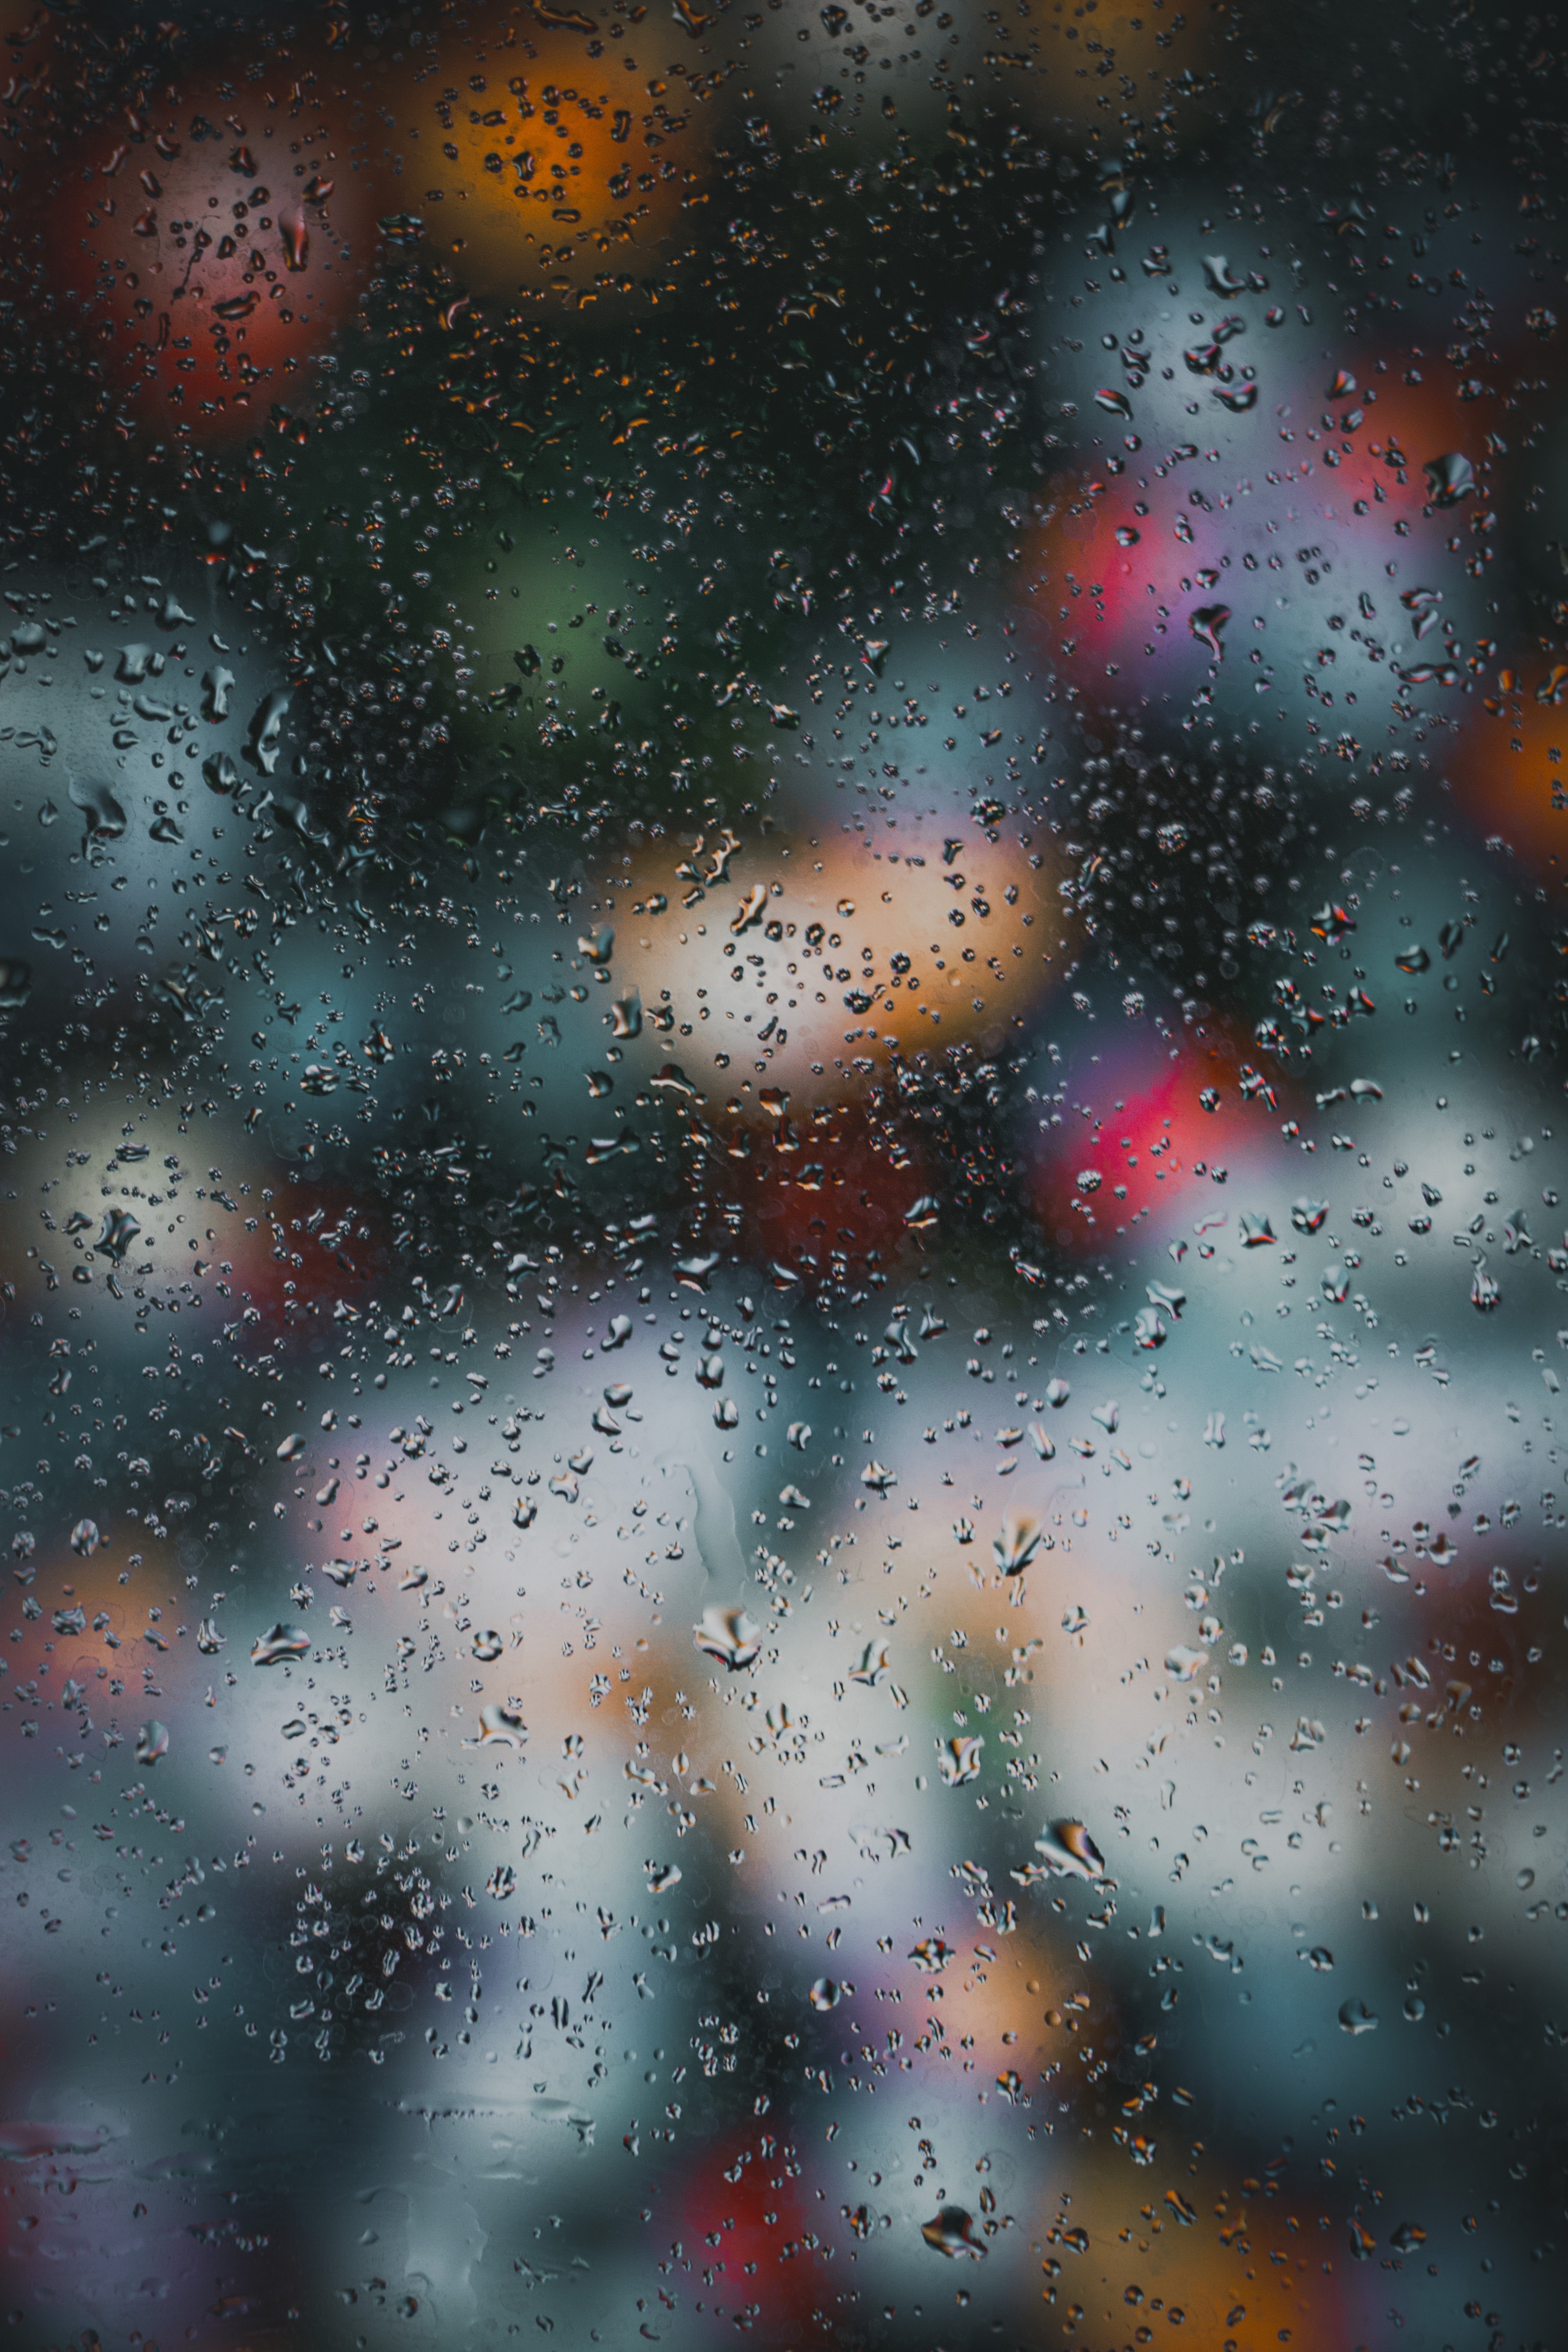 62852 download wallpaper glass, stains, rain, drops, macro, shine, light, spots screensavers and pictures for free